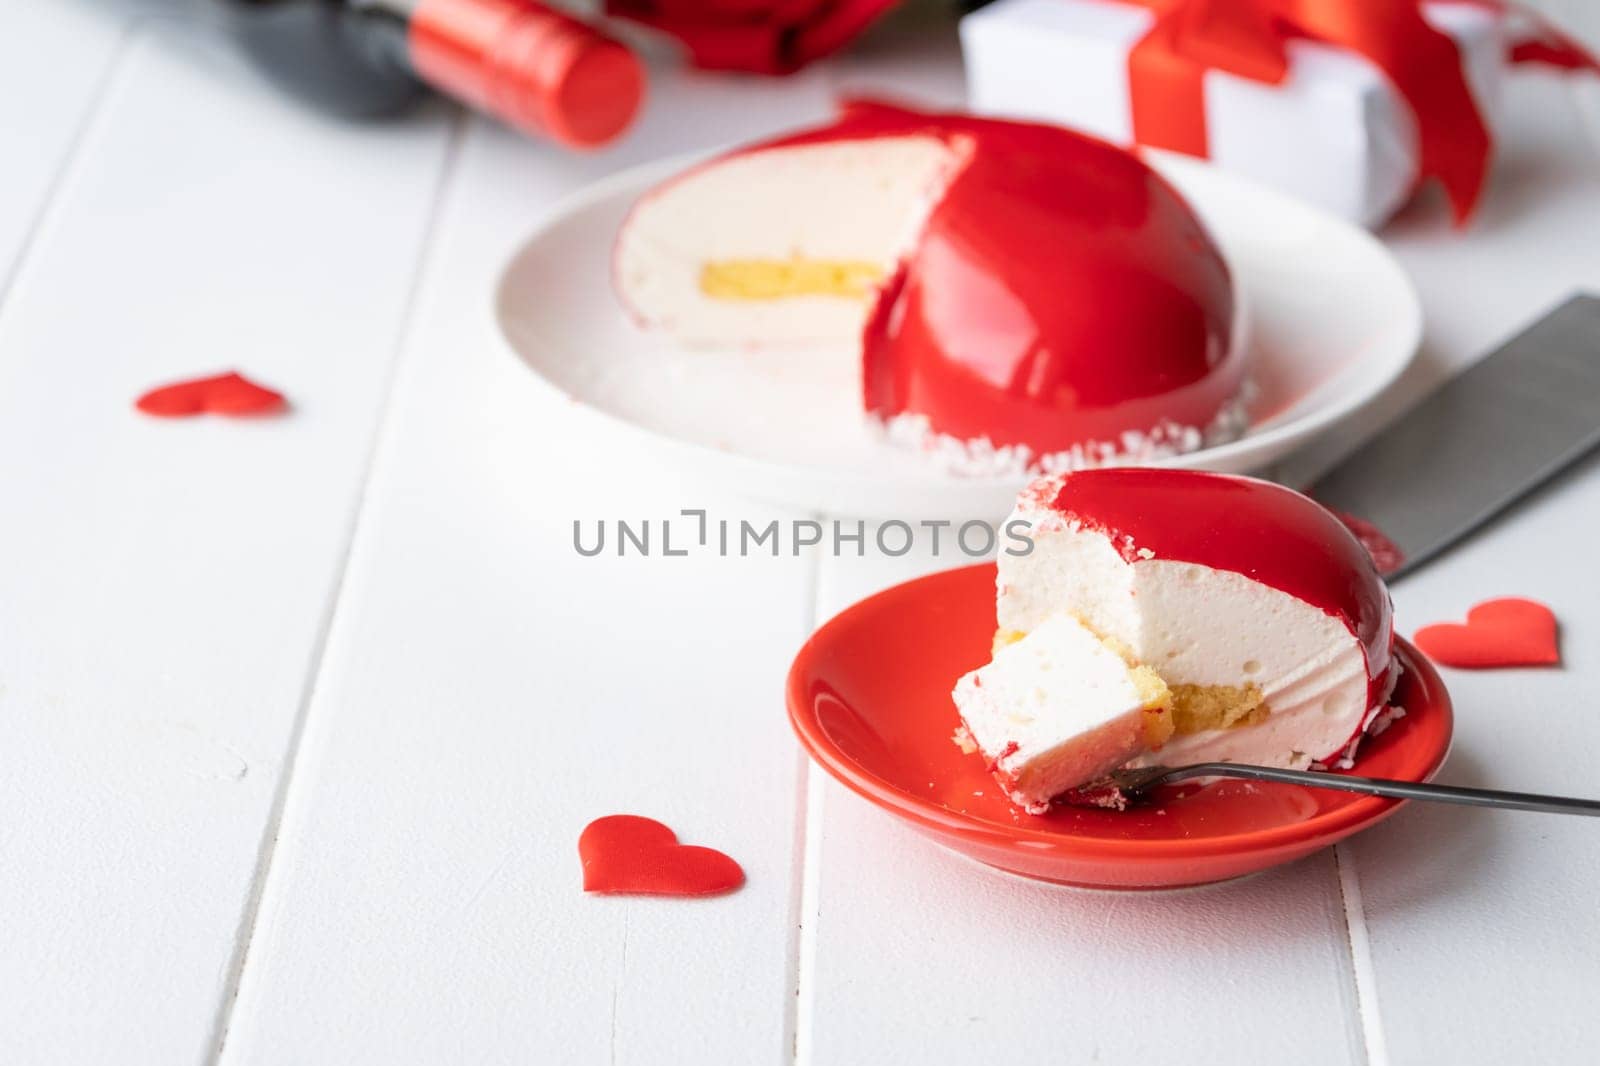 Valentines day. heart shaped glazed valentine cake and flowers on wooden table